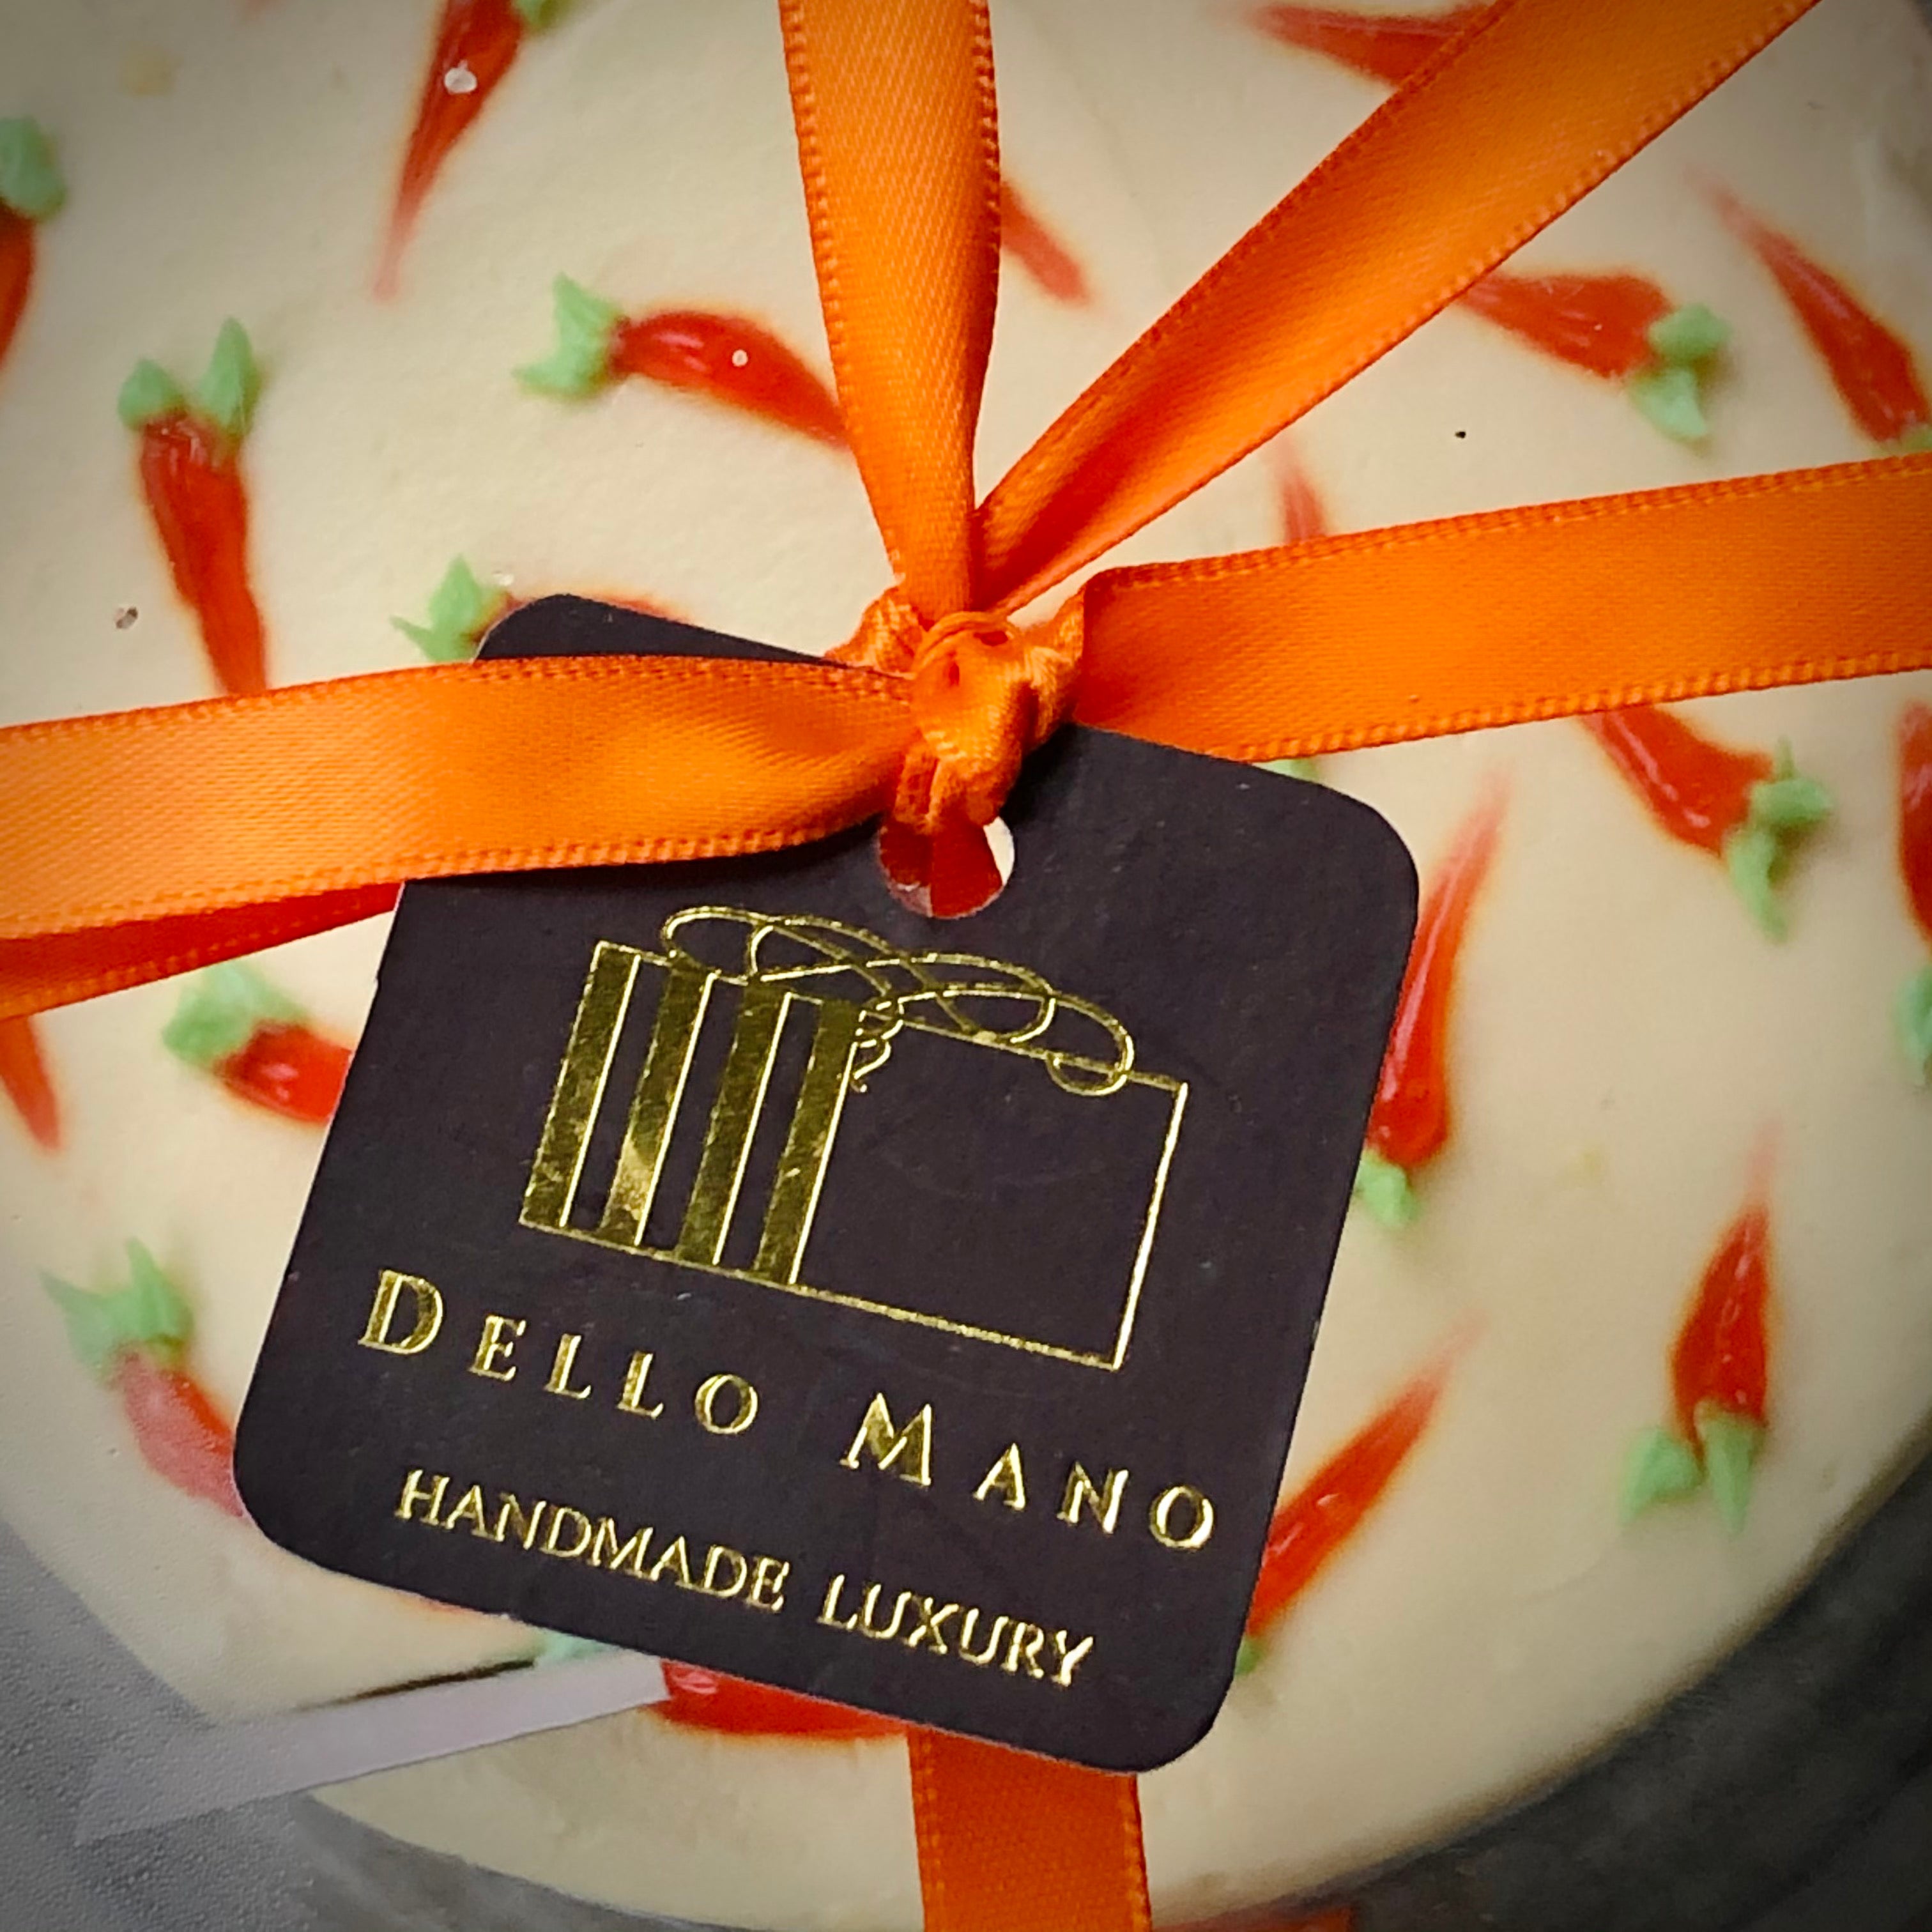 Close up view of the top of the Easter Carrot Cake with ribbon tie and a tag with Dello Mano logo